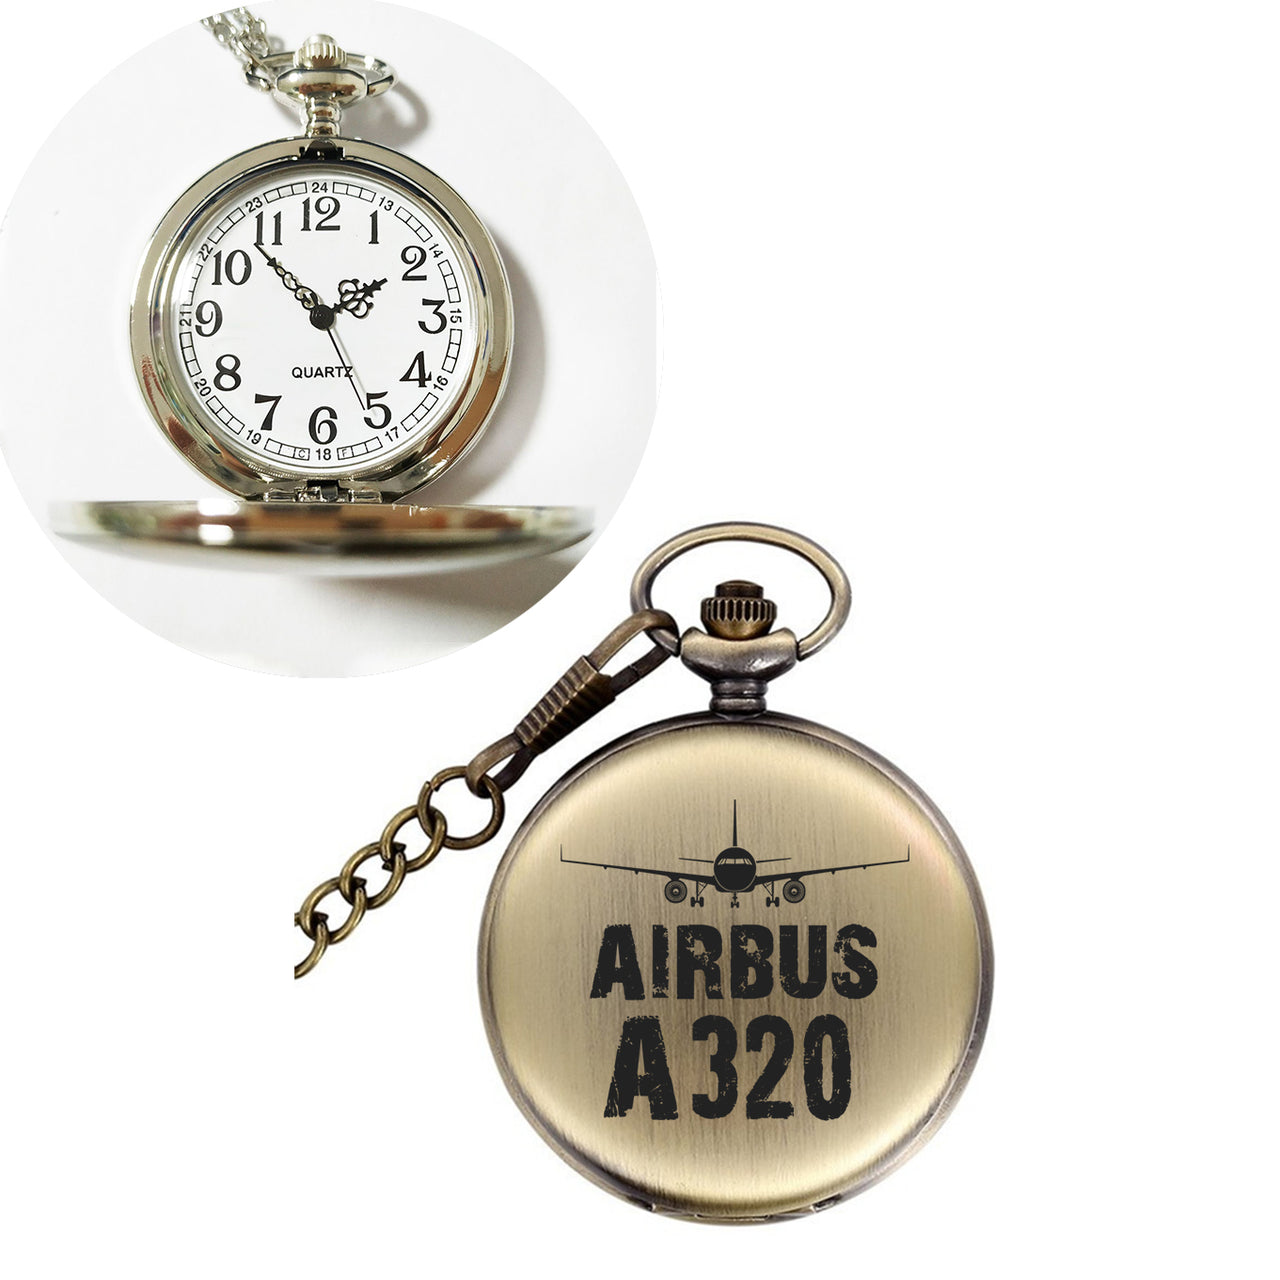 Airbus A320 & Plane Designed Pocket Watches